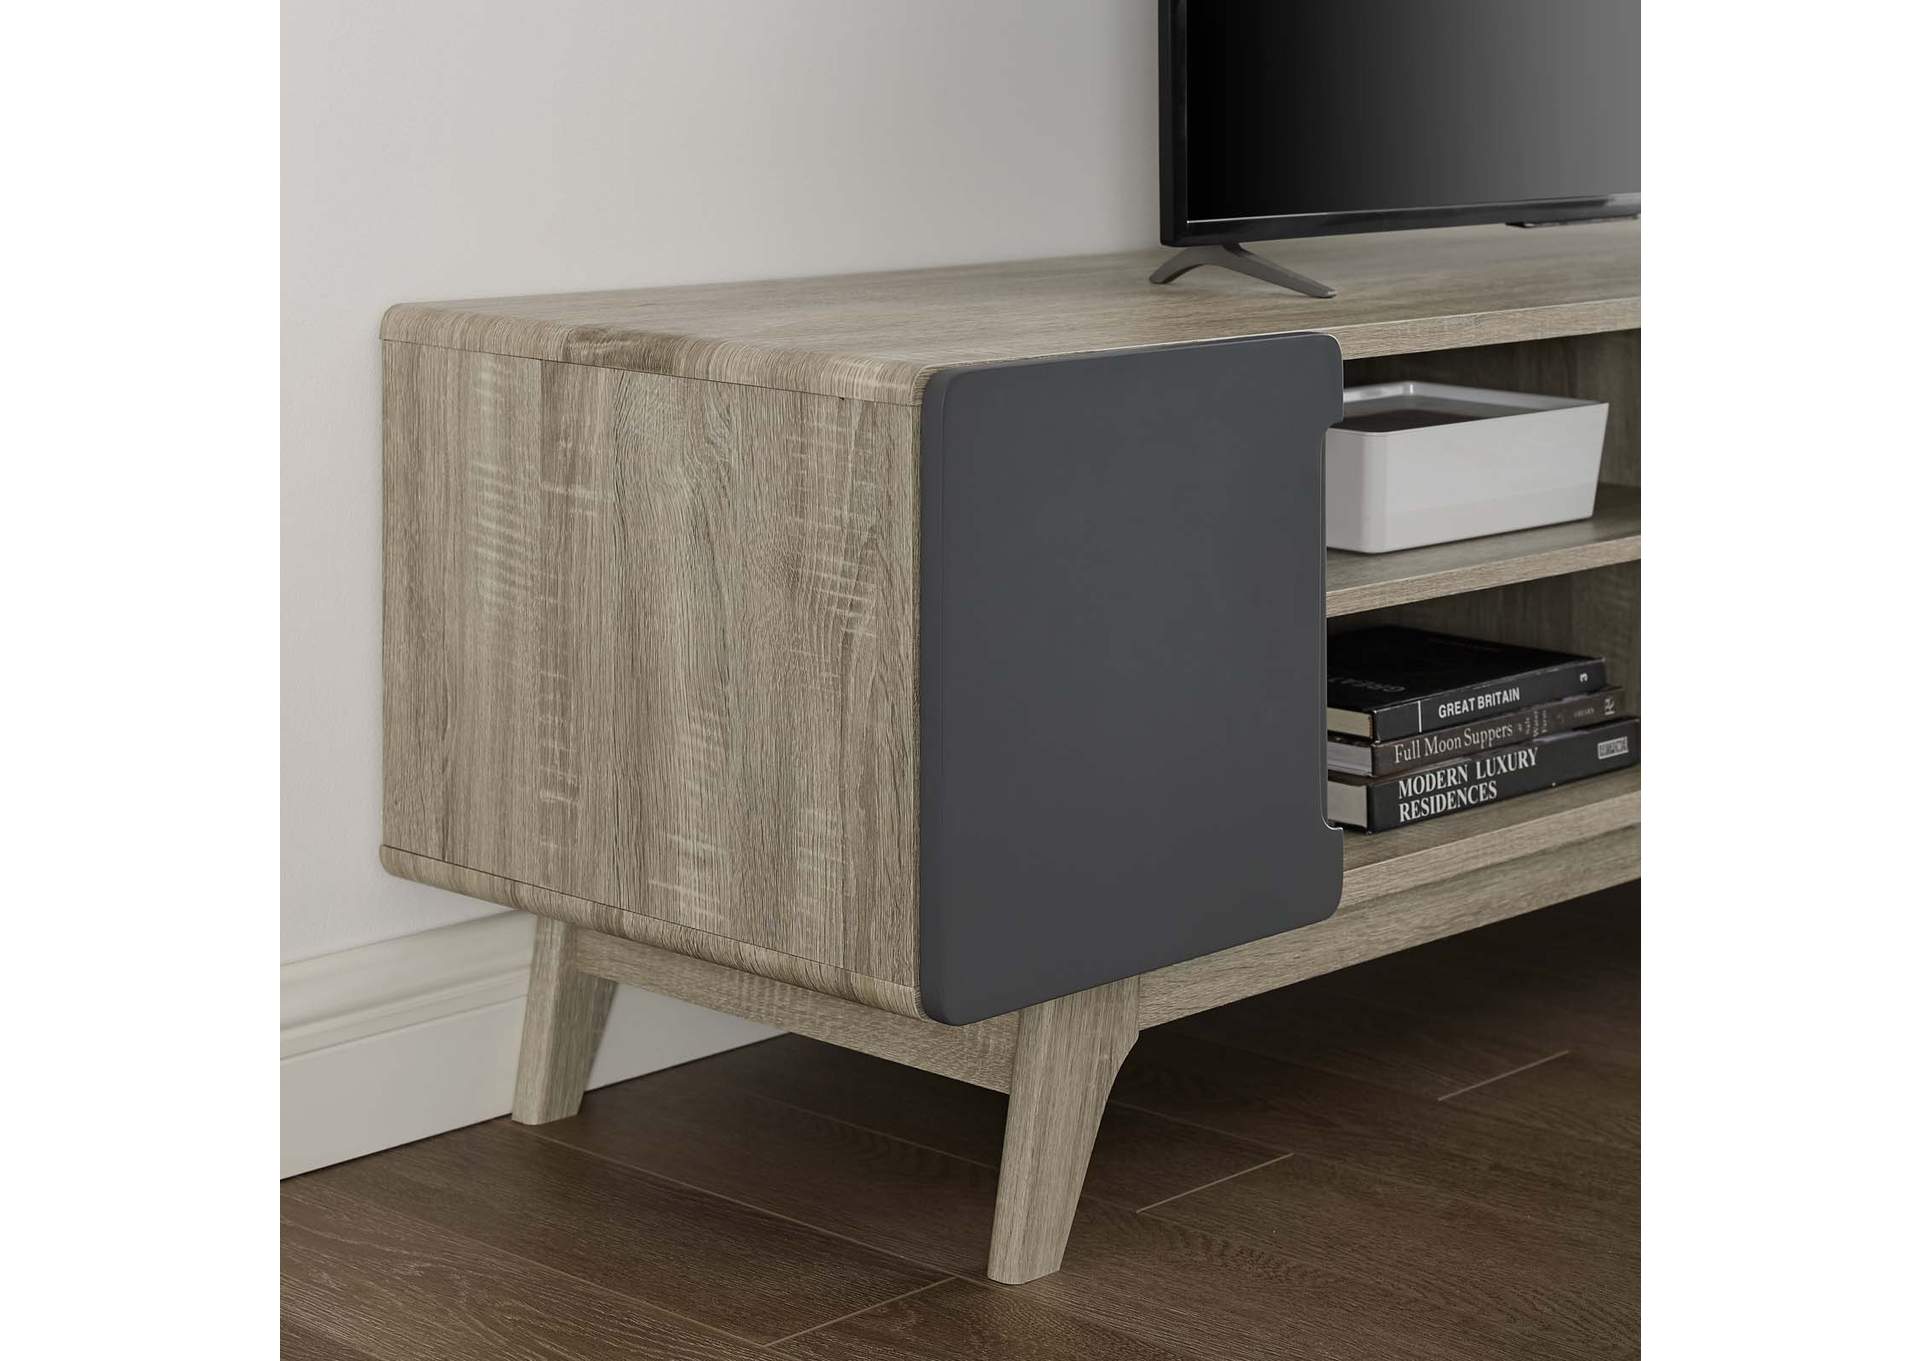 Natural Gray Tread 70" Media Console TV Stand,Modway